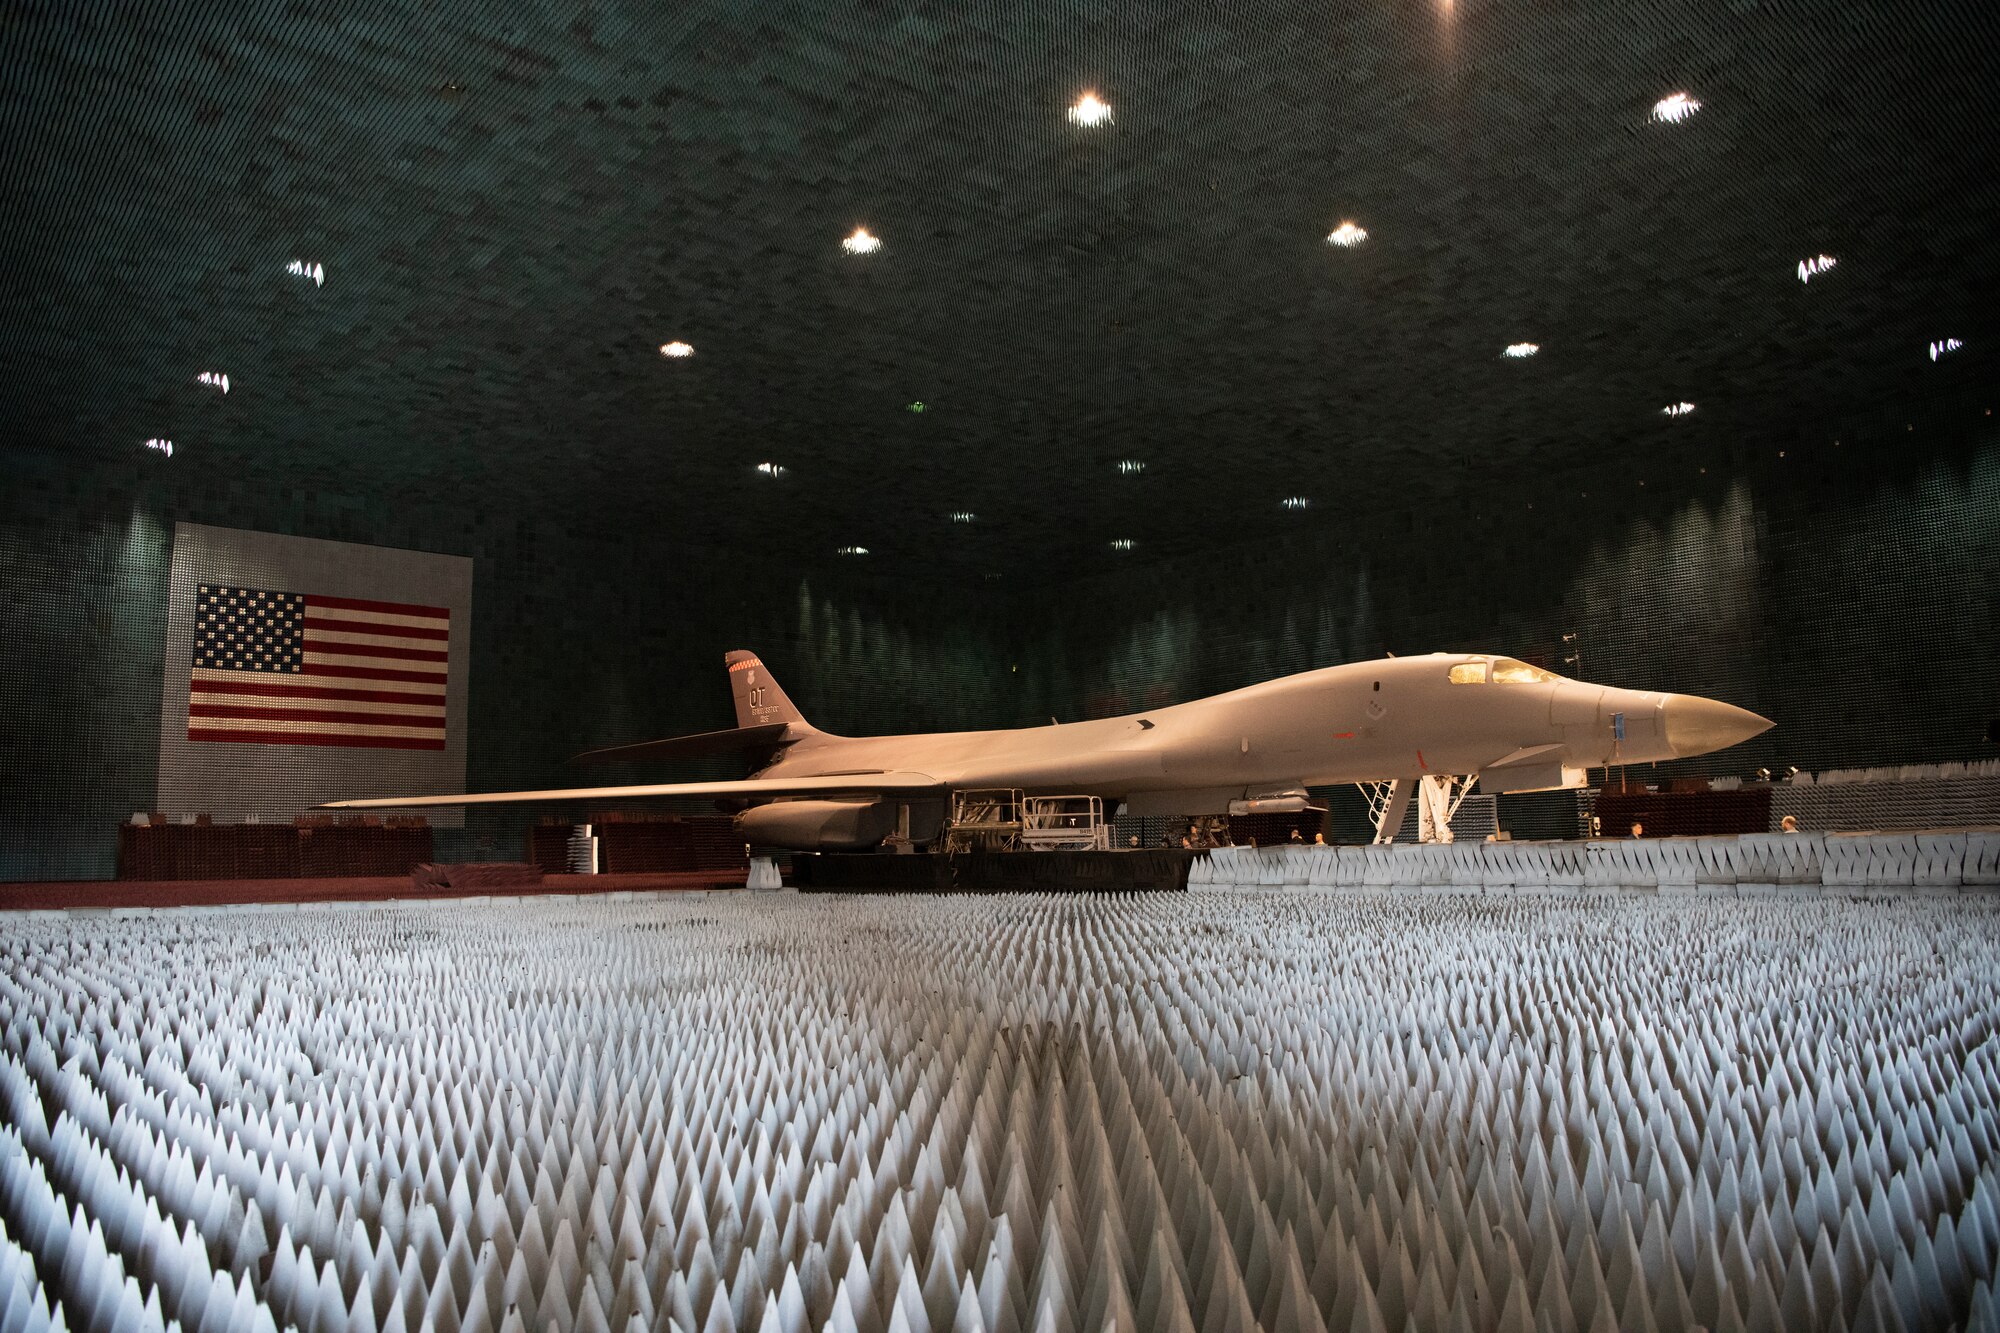 Ground crews move a B-1B Lancer into position at the Benefield Anechoic Facility on Edwards Air Force Base, California, May 20. The Lancer, from the 337th Test and Evaluation Squadron, 53rd Wing, out of Dyess Air Force Base, Texas, will be used to conduct testing of Pre-processor Flight Software (PFS) 6.42. (Air Force photo by 1st Lt. Christine Saunders)